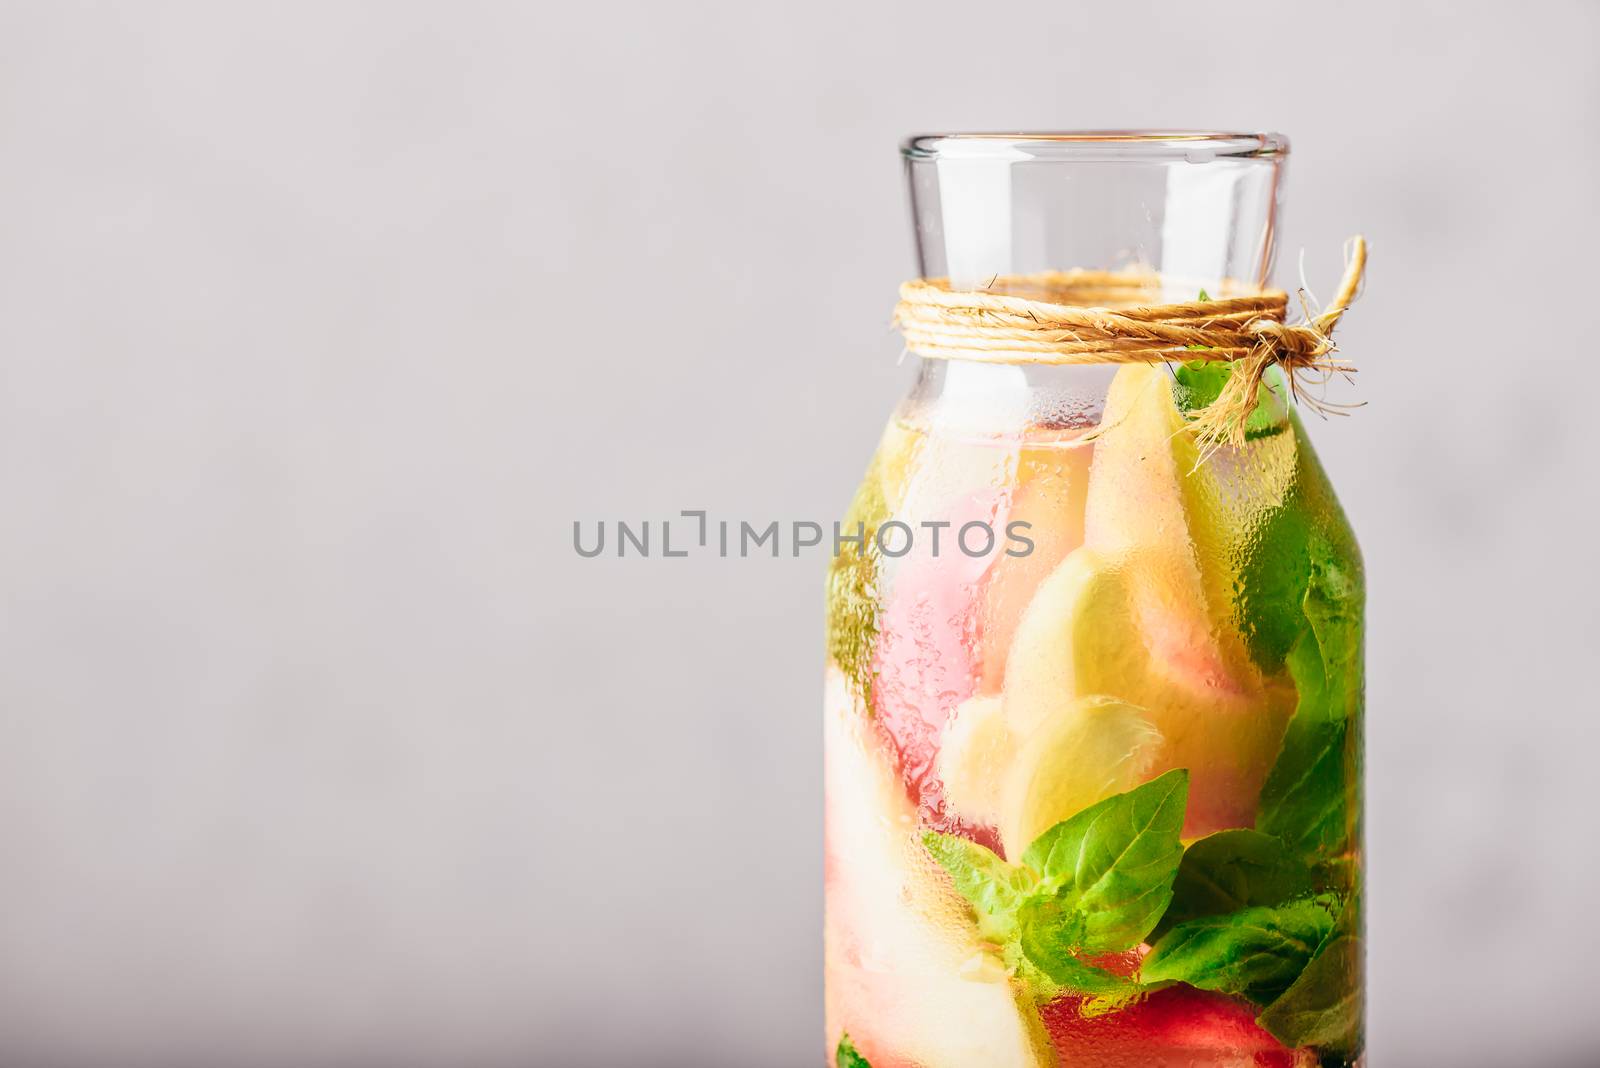 Part of Bottle of Infused Water with Sliced Peach and Basil Leaves.